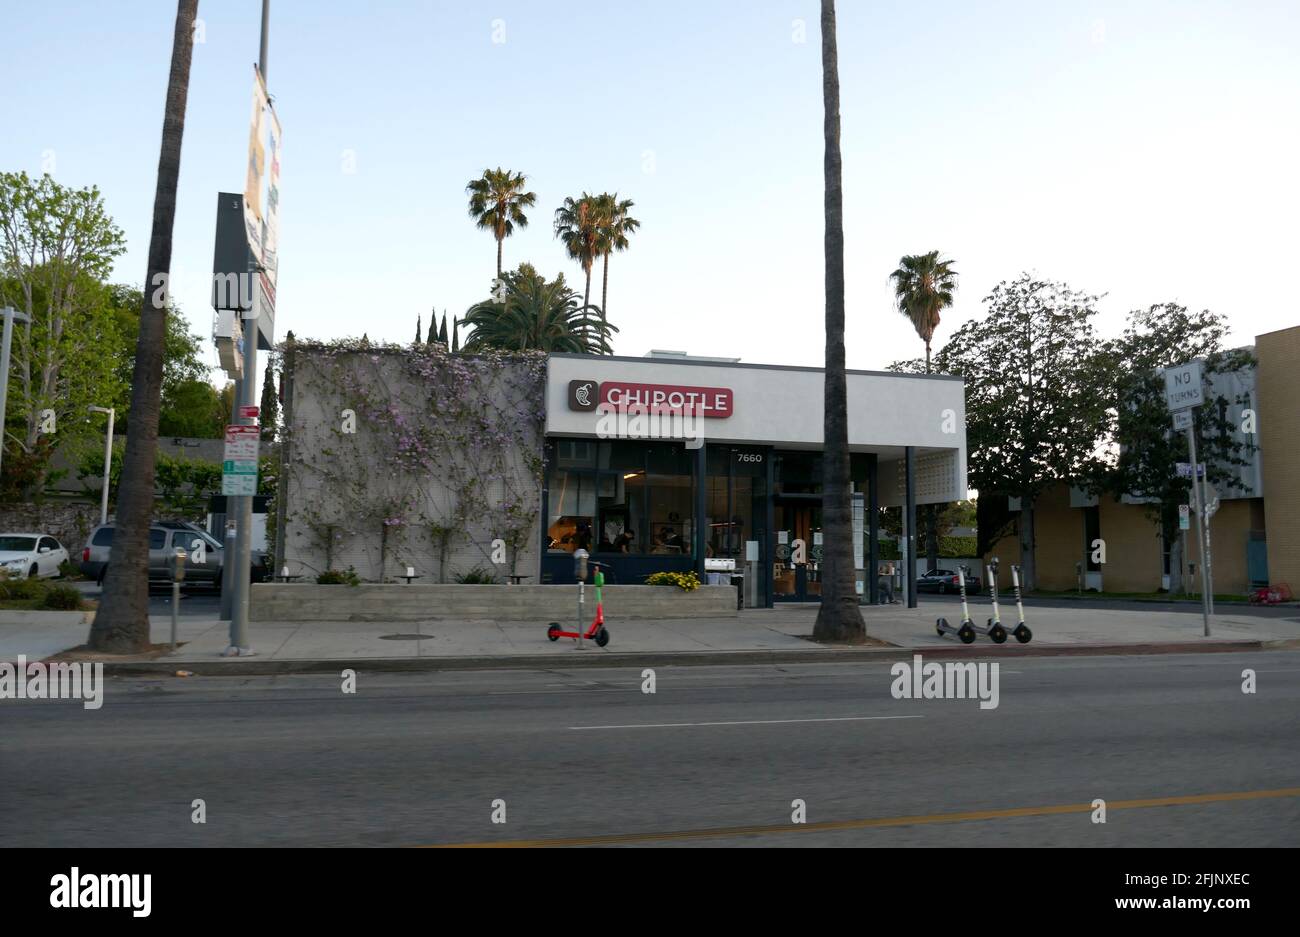 Los Angeles, California, USA 17th April 2021 A general view of atmosphere of Former All American Burger Location where Fast Times at Ridgemont High Filmed at, now a Chipotle at 7660 Sunset Blvd on April 17, 2021 in Los Angeles, California, USA. Photo by Barry King/Alamy Stock Photo Stock Photo